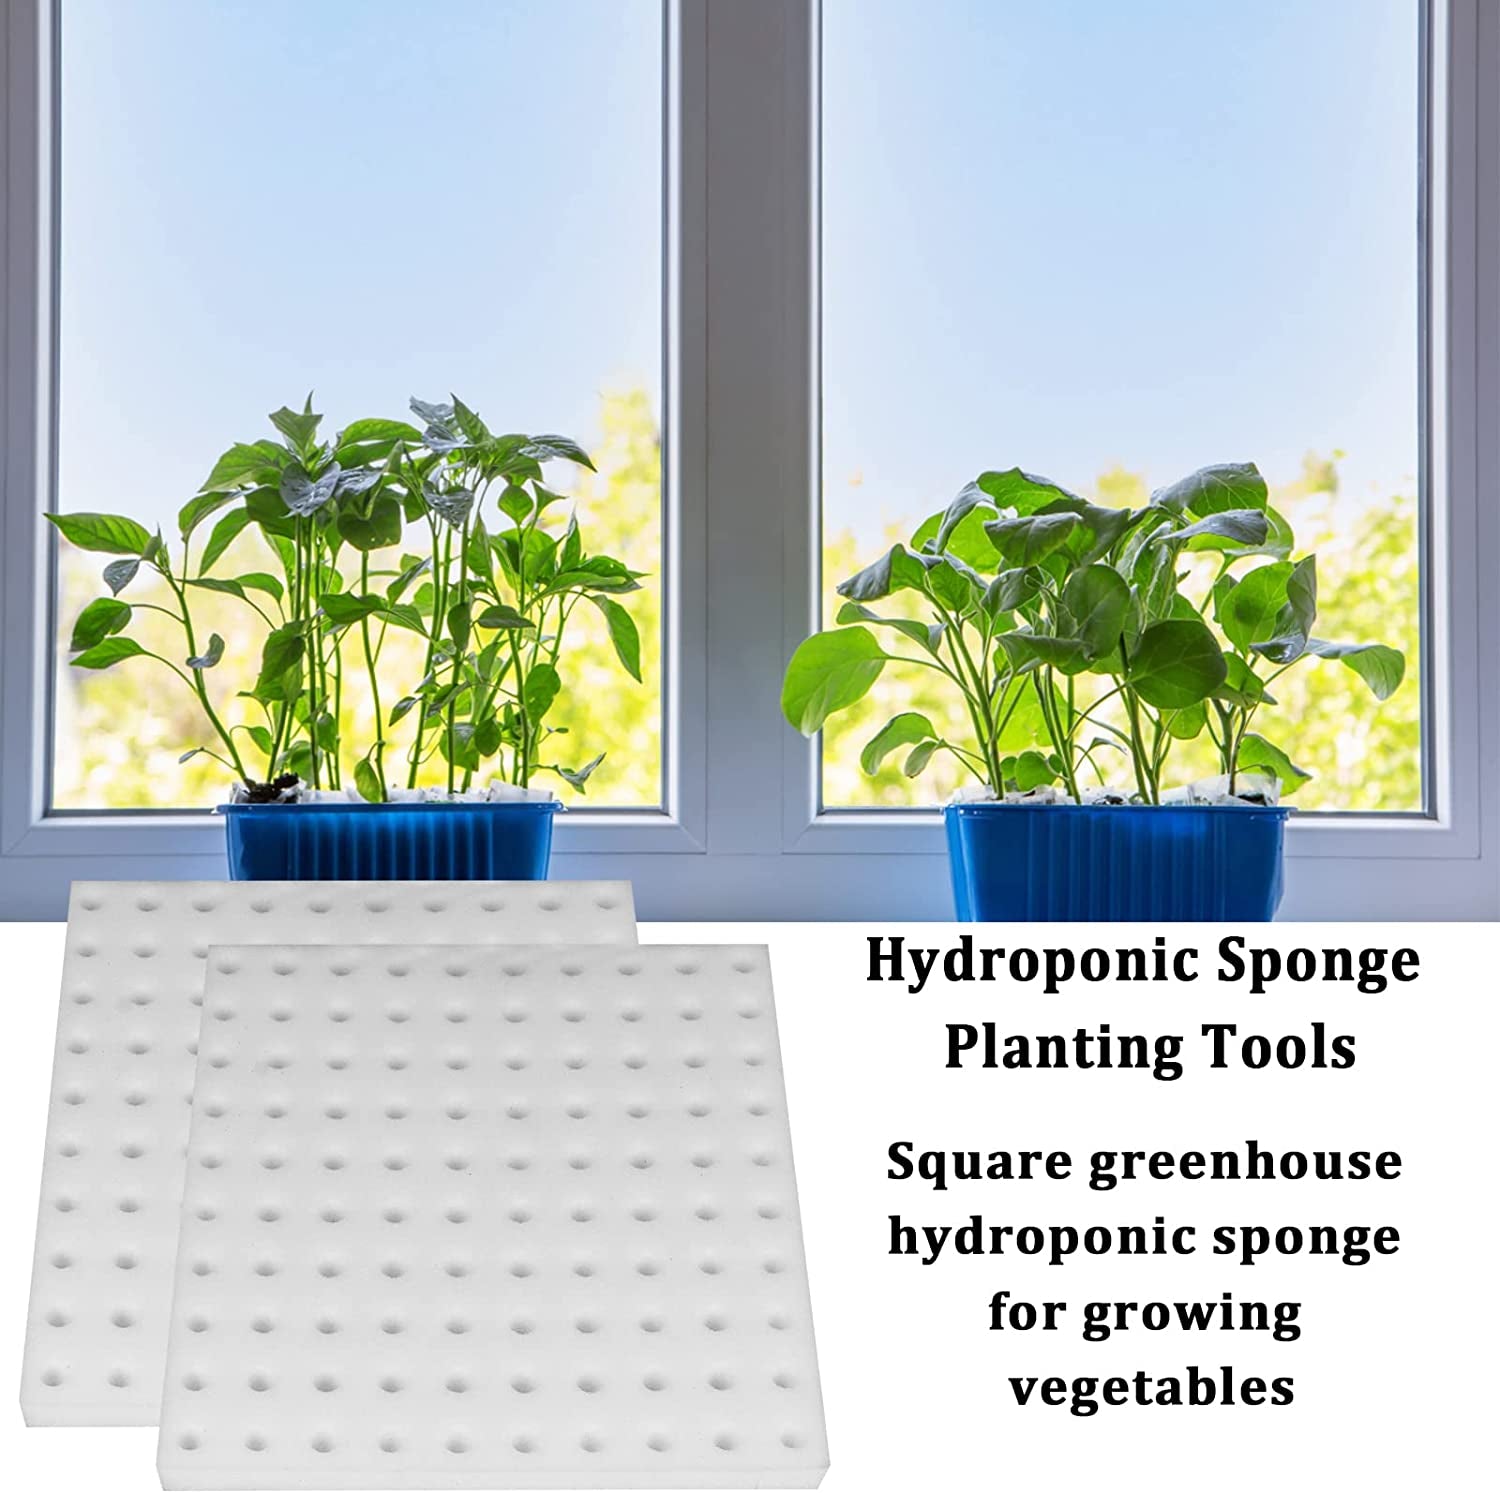 400 Pcs Hydroponic Sponges Planting Gardening Tool Soilless Cultivation Seedling Sponges Cultivation Sponge Greenhouse for Small Bud Growth & Grow Seedlings